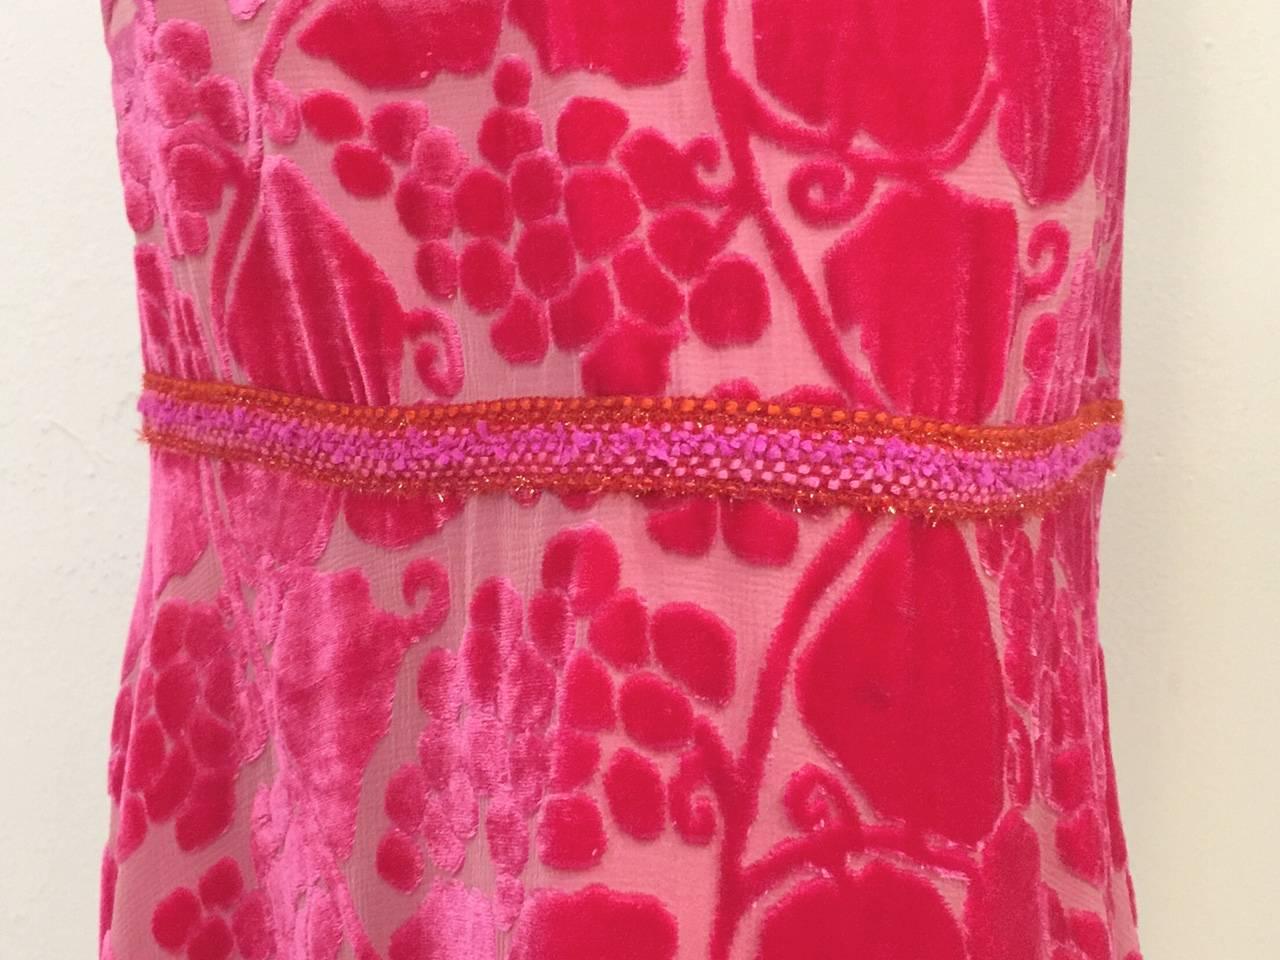 Chanel 2001 Cruise Collection Fuschia Velvet Burnout Skirt   In Excellent Condition For Sale In Palm Beach, FL